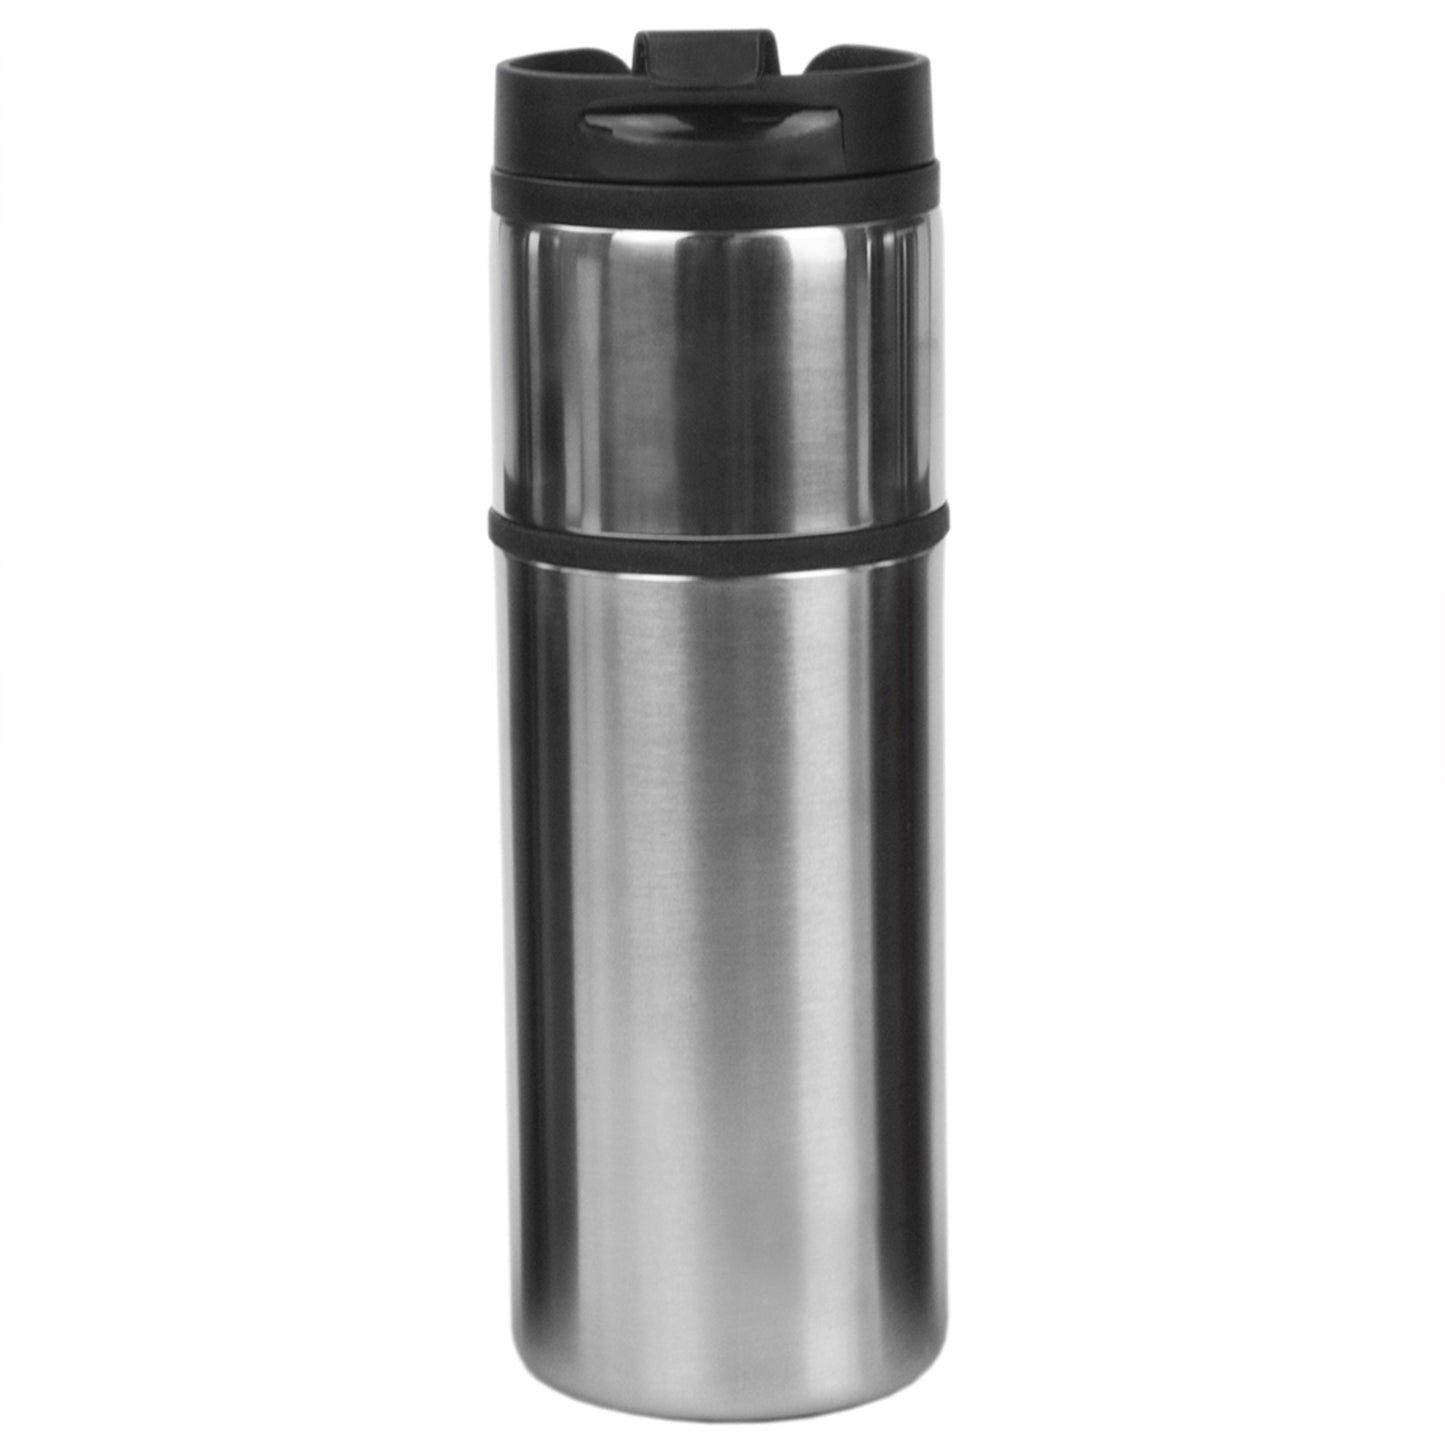 Home Basics Two Tone Stainless Steel 16 oz. Travel Mug, Silver - Silver